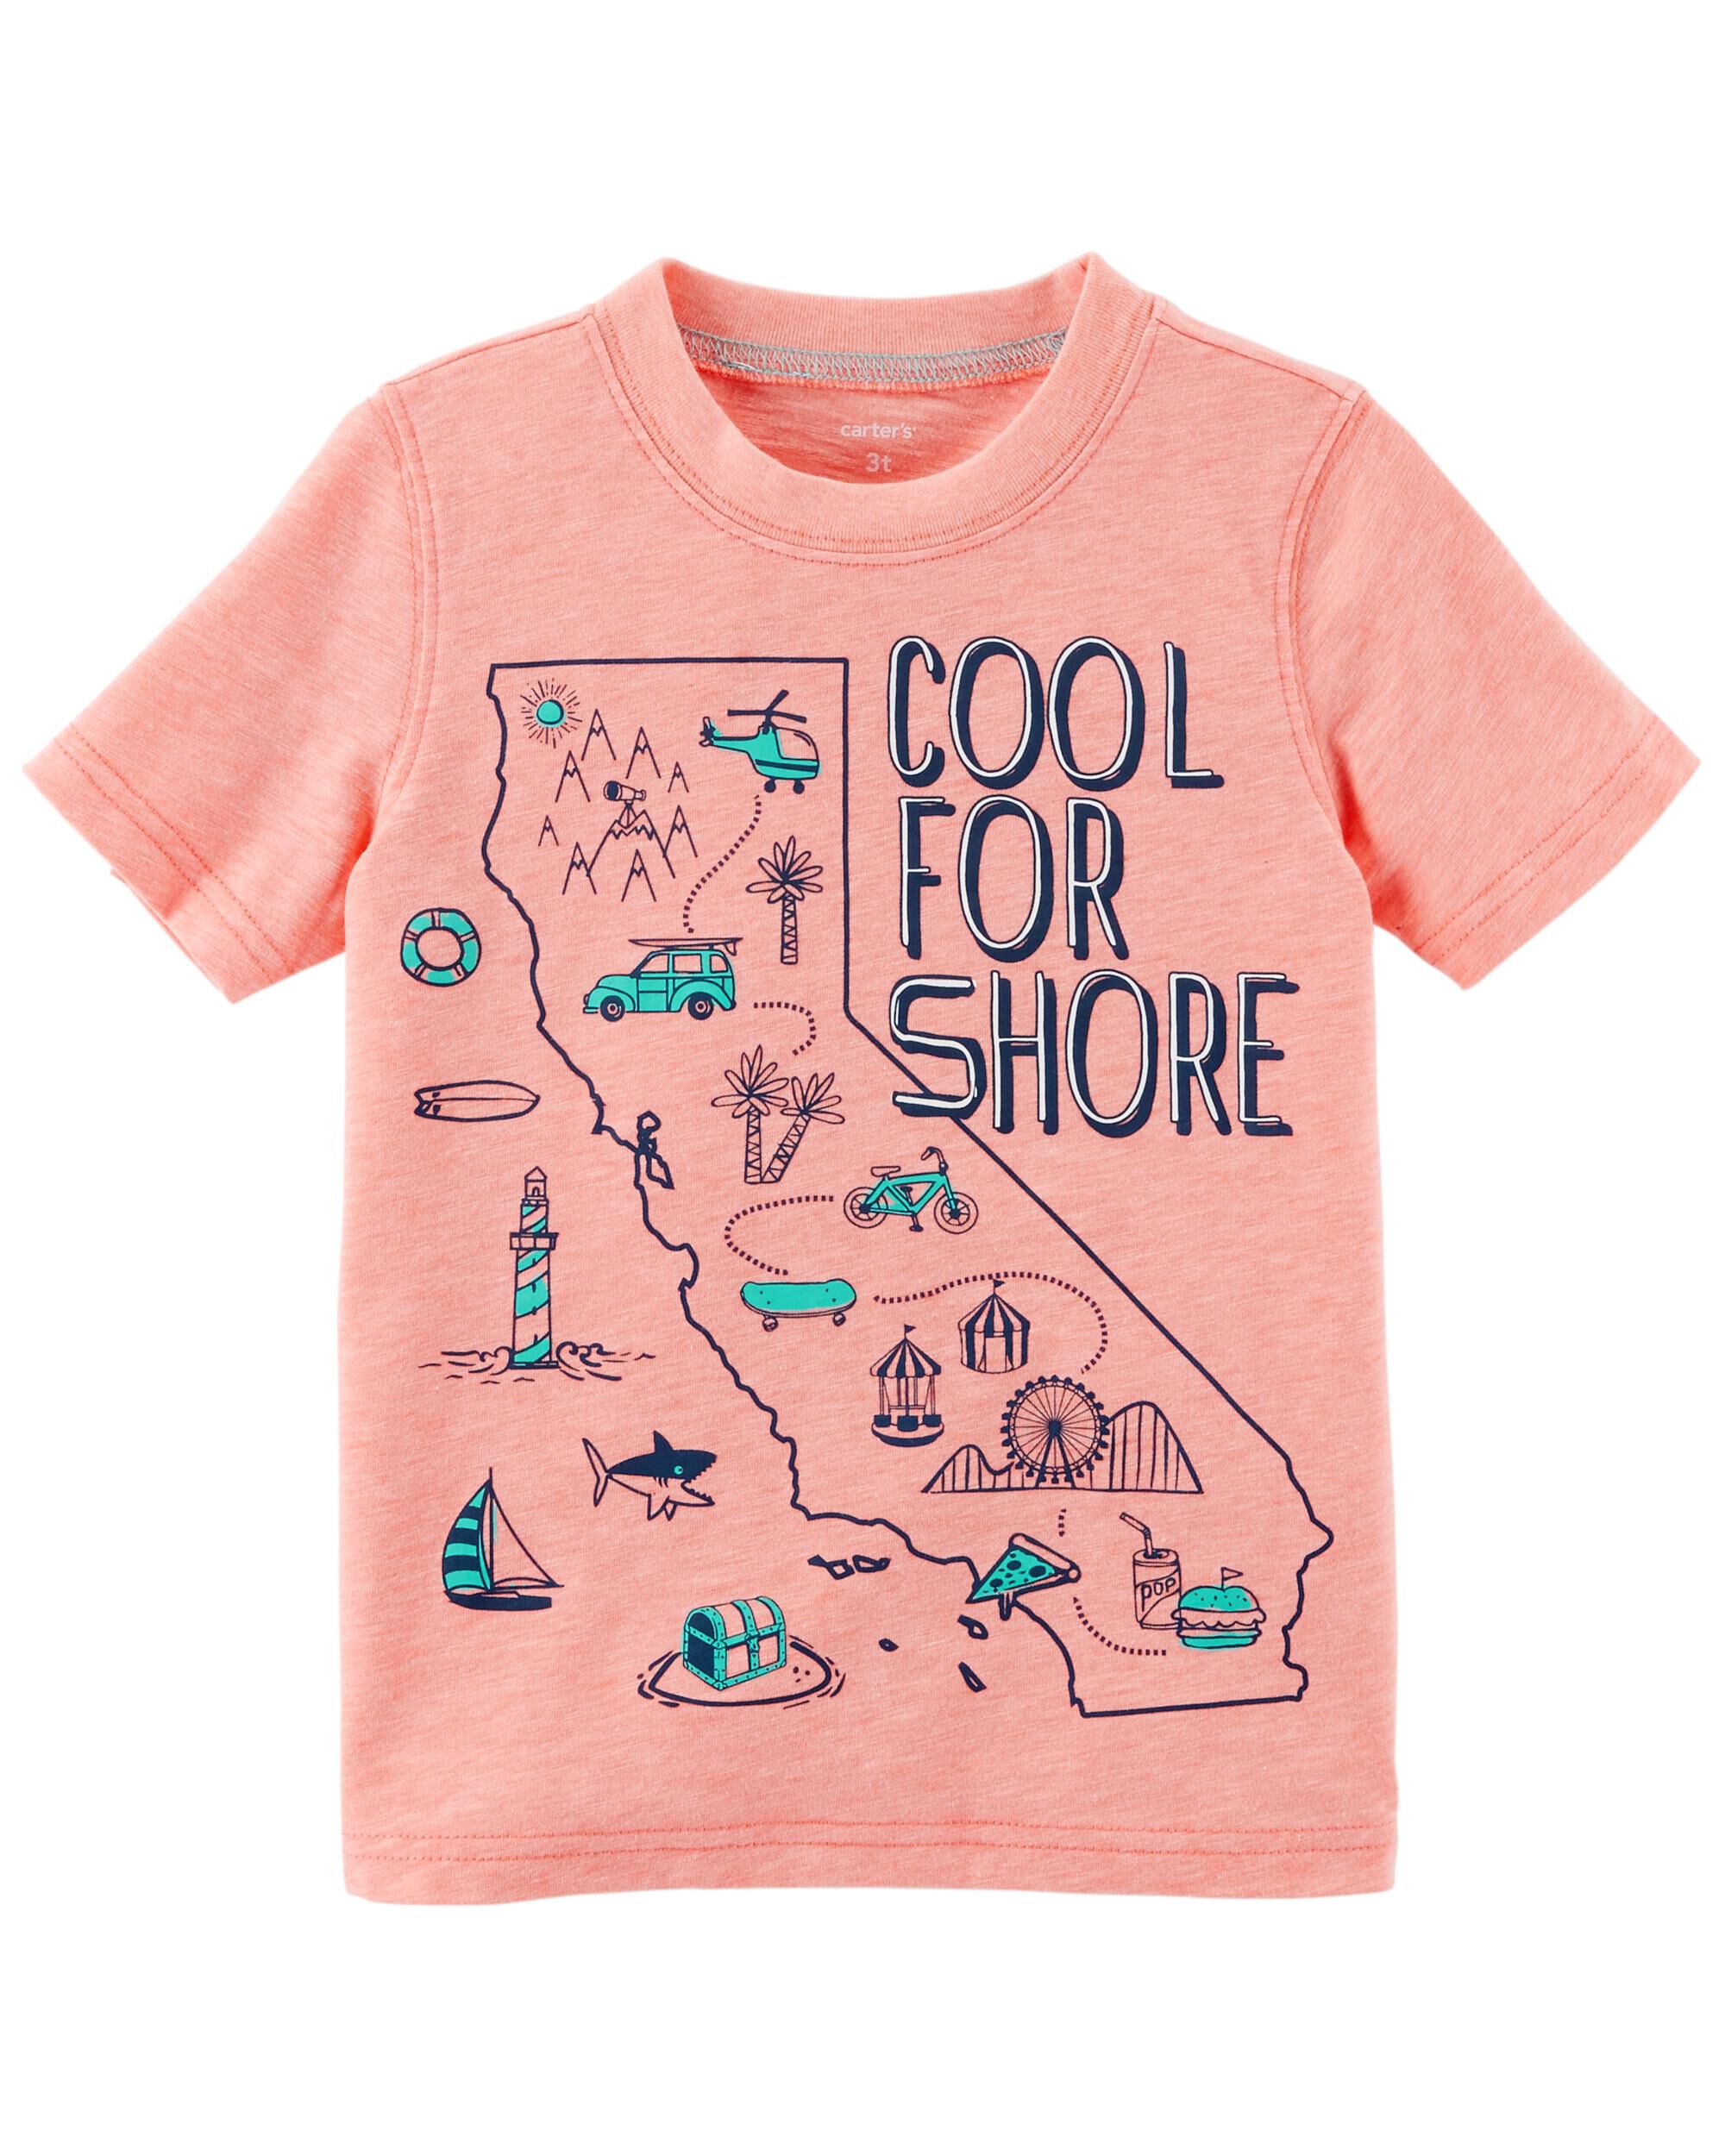 Neon cool for shore jersey tee